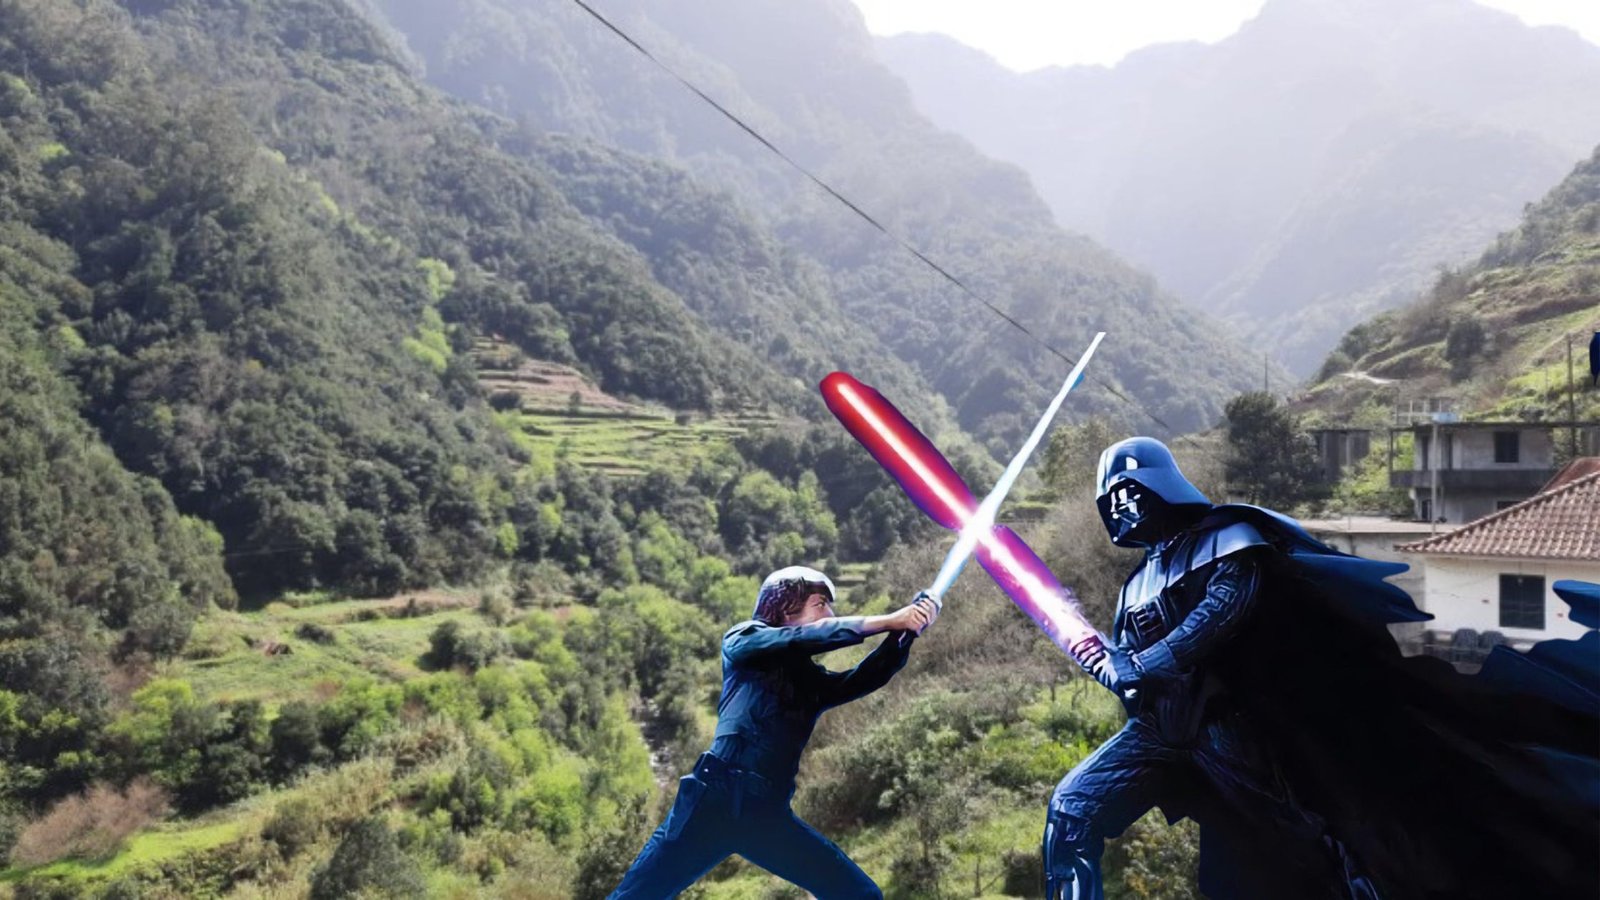 Star Wars – Boaventura’s Lombo do Urzal is among the locations chosen for filming scenes of the upcoming Star Wars series.